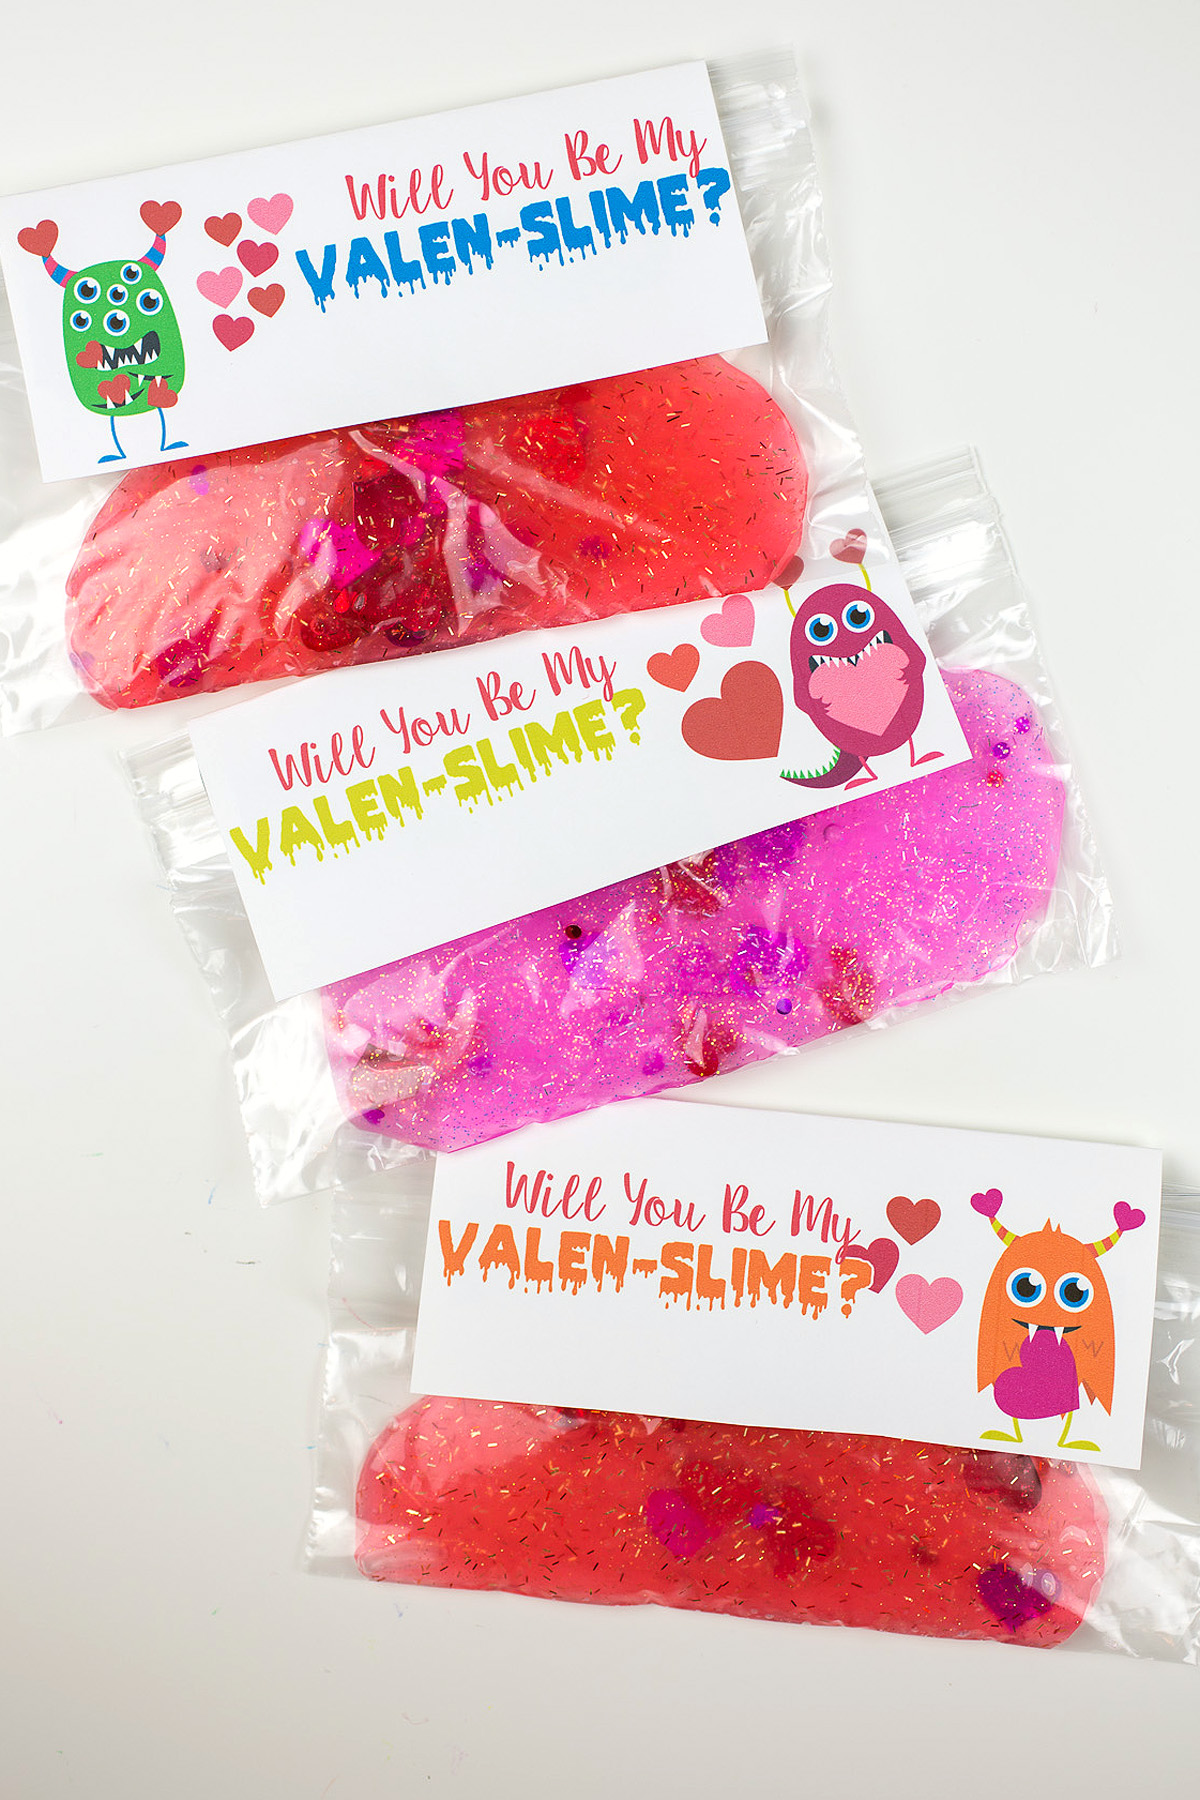 will-you-be-my-valen-slime-valentines-skip-to-my-lou